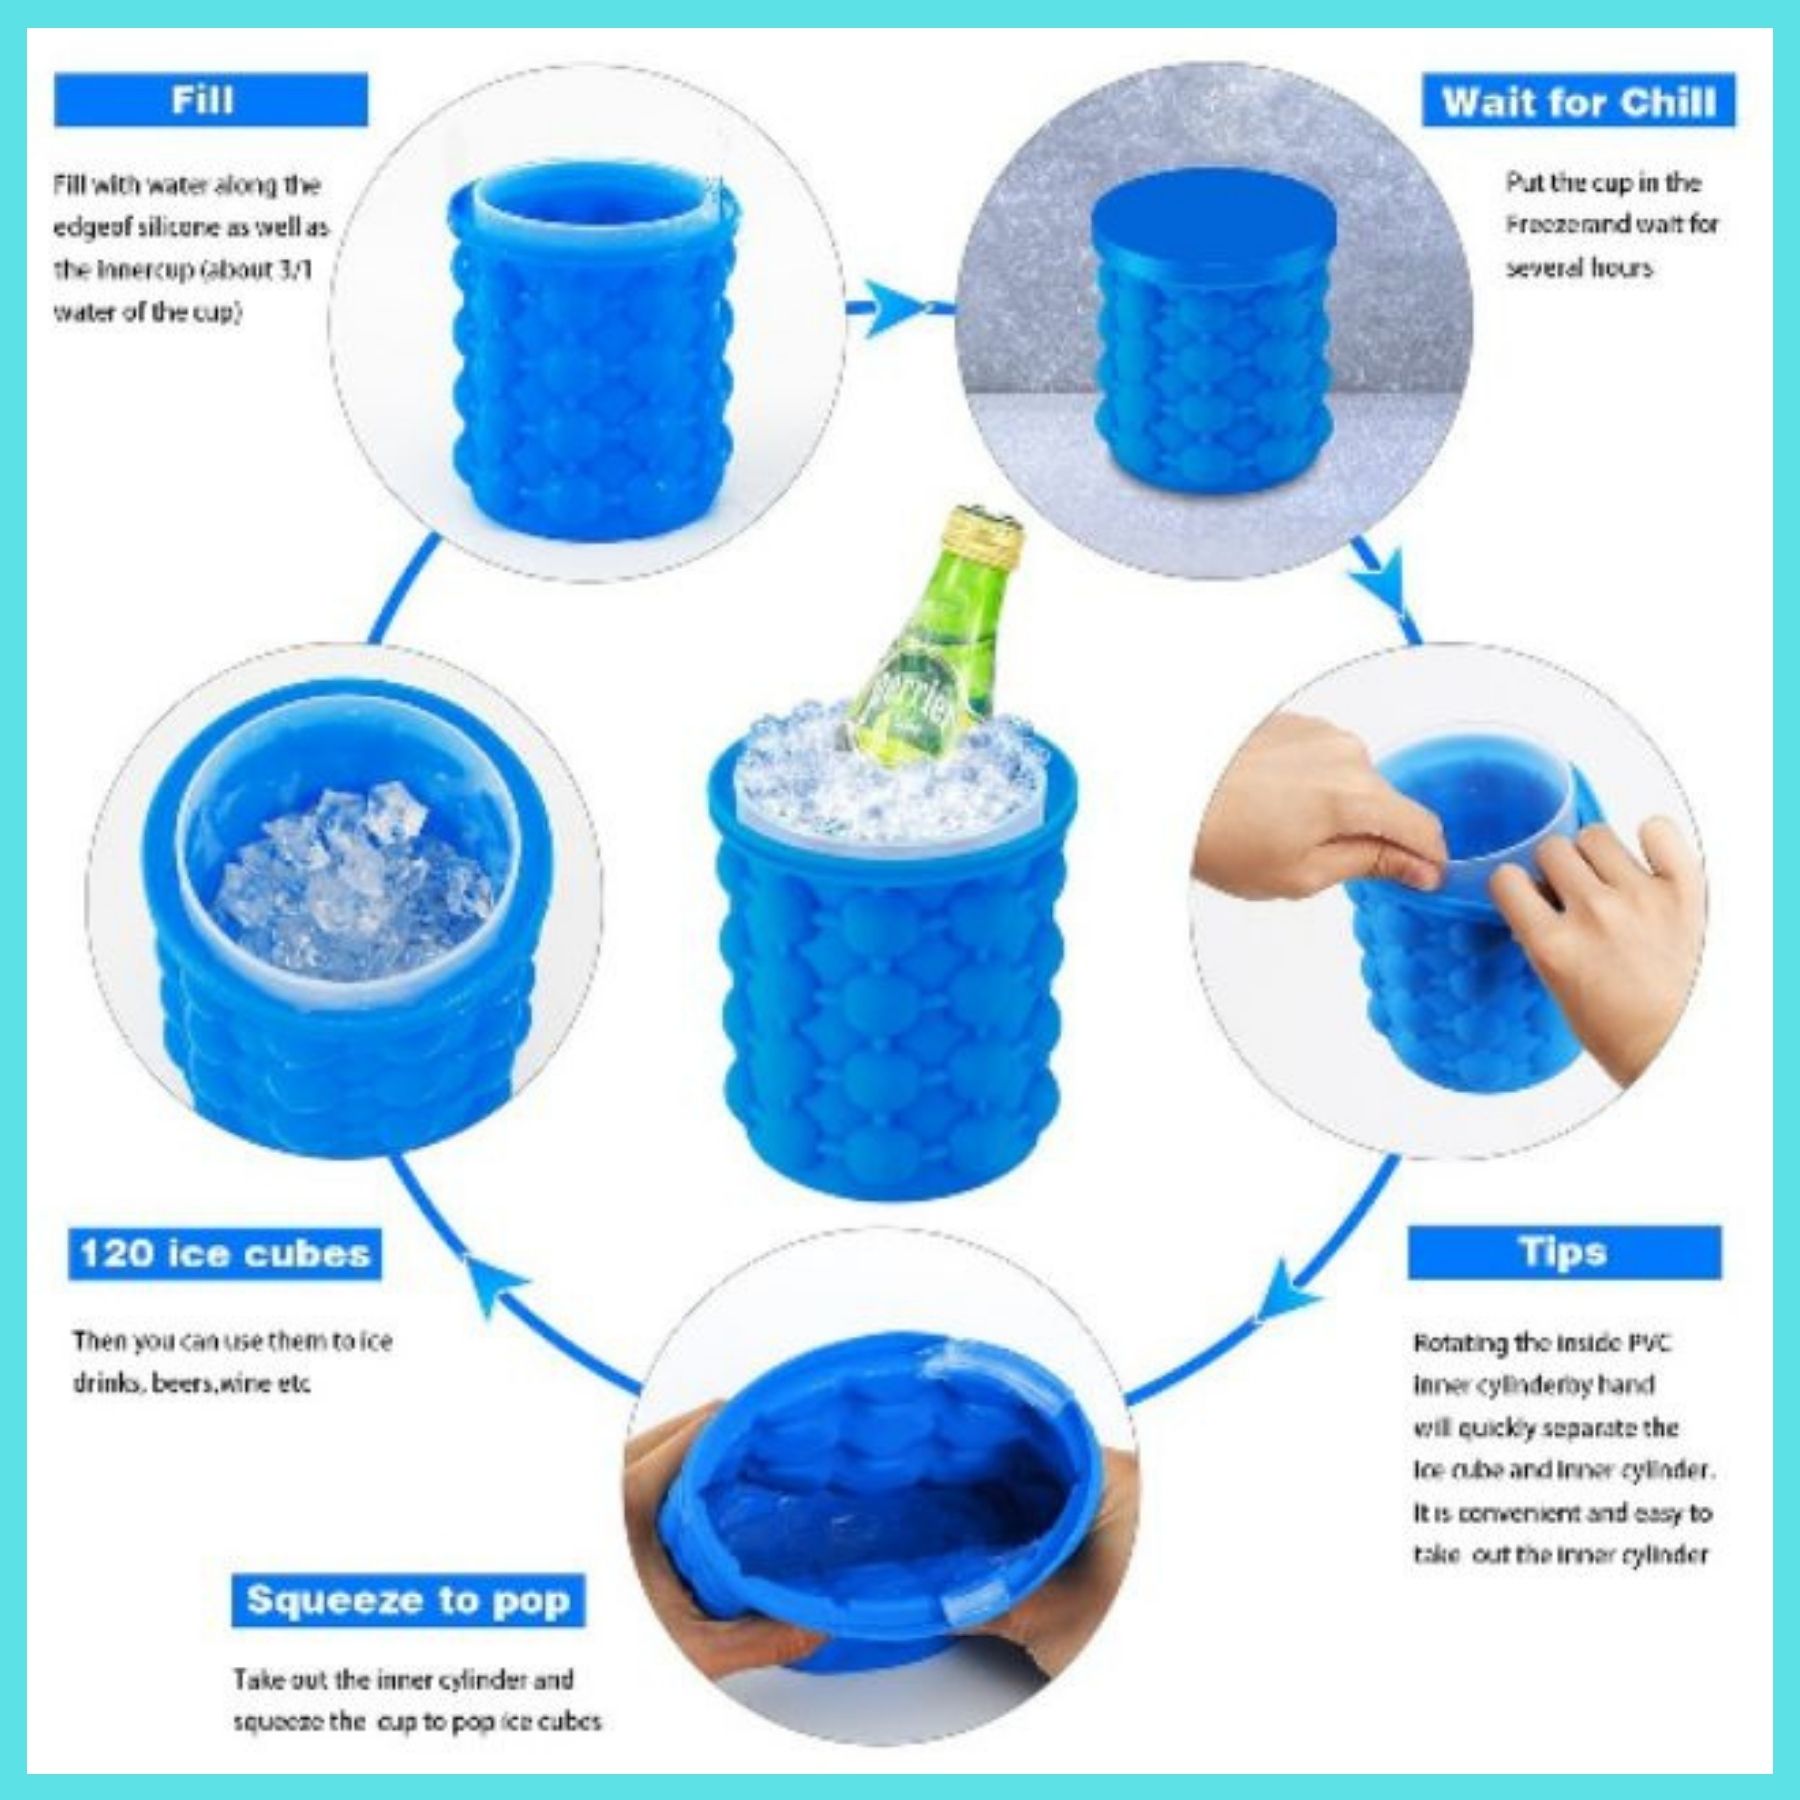 HUANGDOU The Ultimate Ice Cube Maker Silicone Bucket with Lid Makes Small Size Nugget Ice Chips for Soft Drinks, Cocktail Ice, Wine on Ice, Crushed Ice Maker